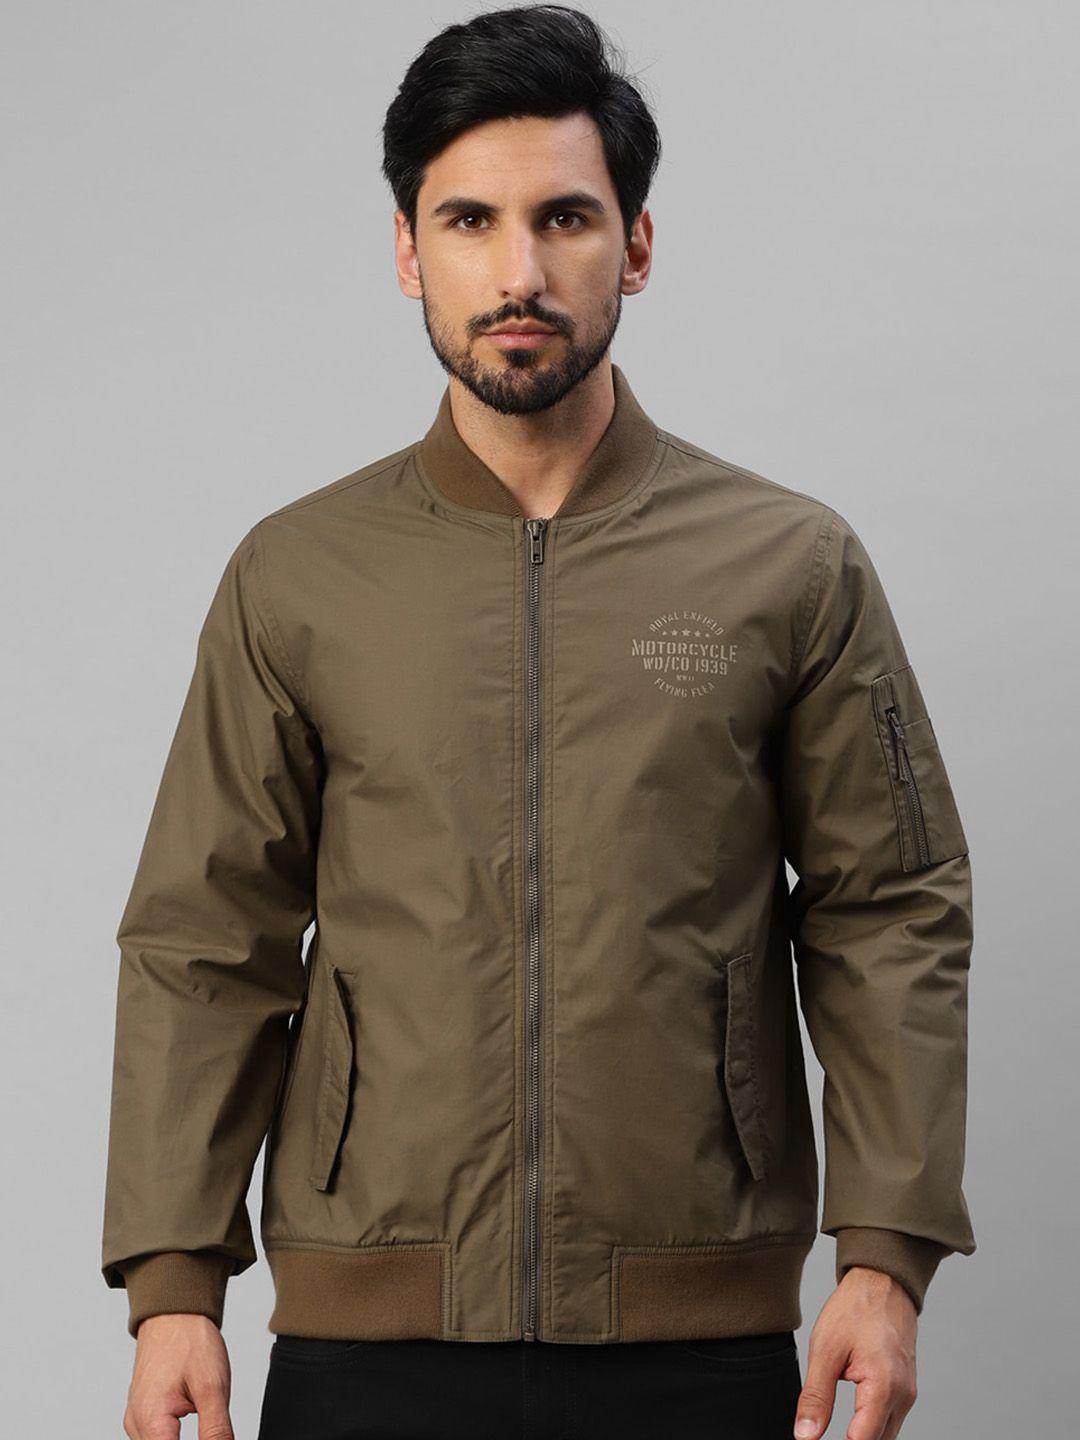 royal enfield stand collar bomber jacket with zip detail